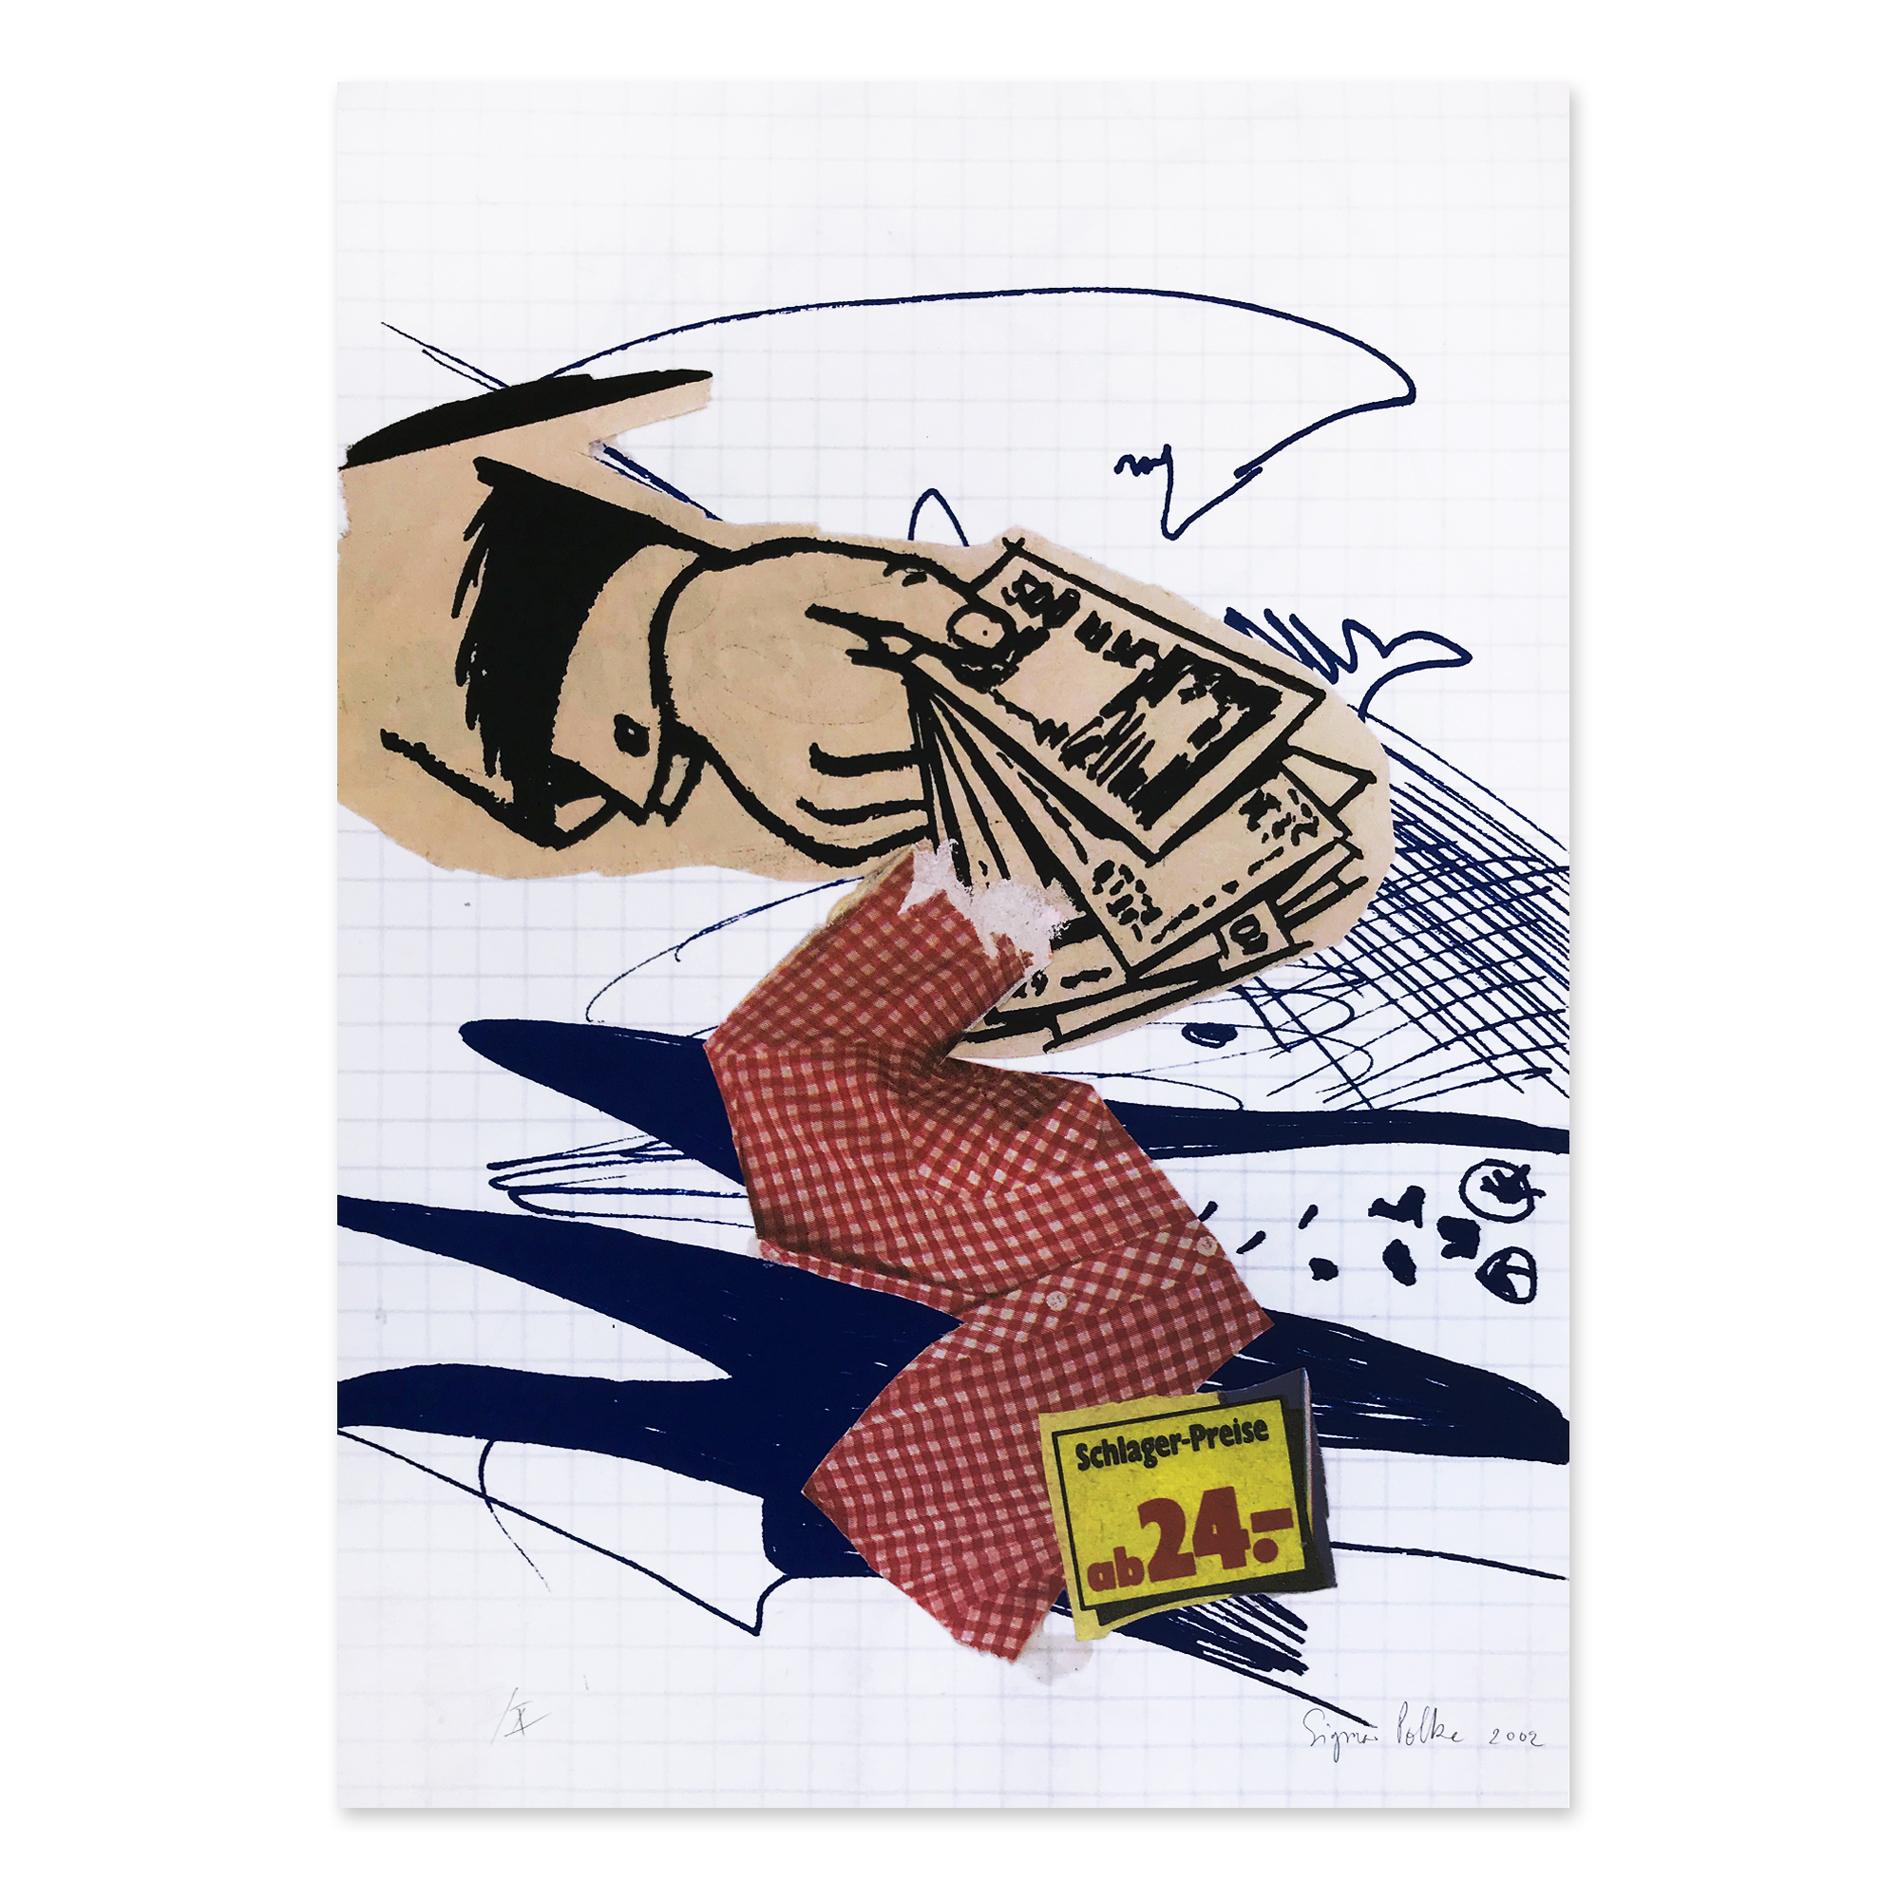 Sigmar Polke (German, 1941 – 2010)
Bargeld Lacht, 2002
Medium: Colour offset and screenprint on cardboard
Dimensions: 70 × 50 cm
Edition of 70 + X: Hand-signed, numbered and dated
Condition: Excellent